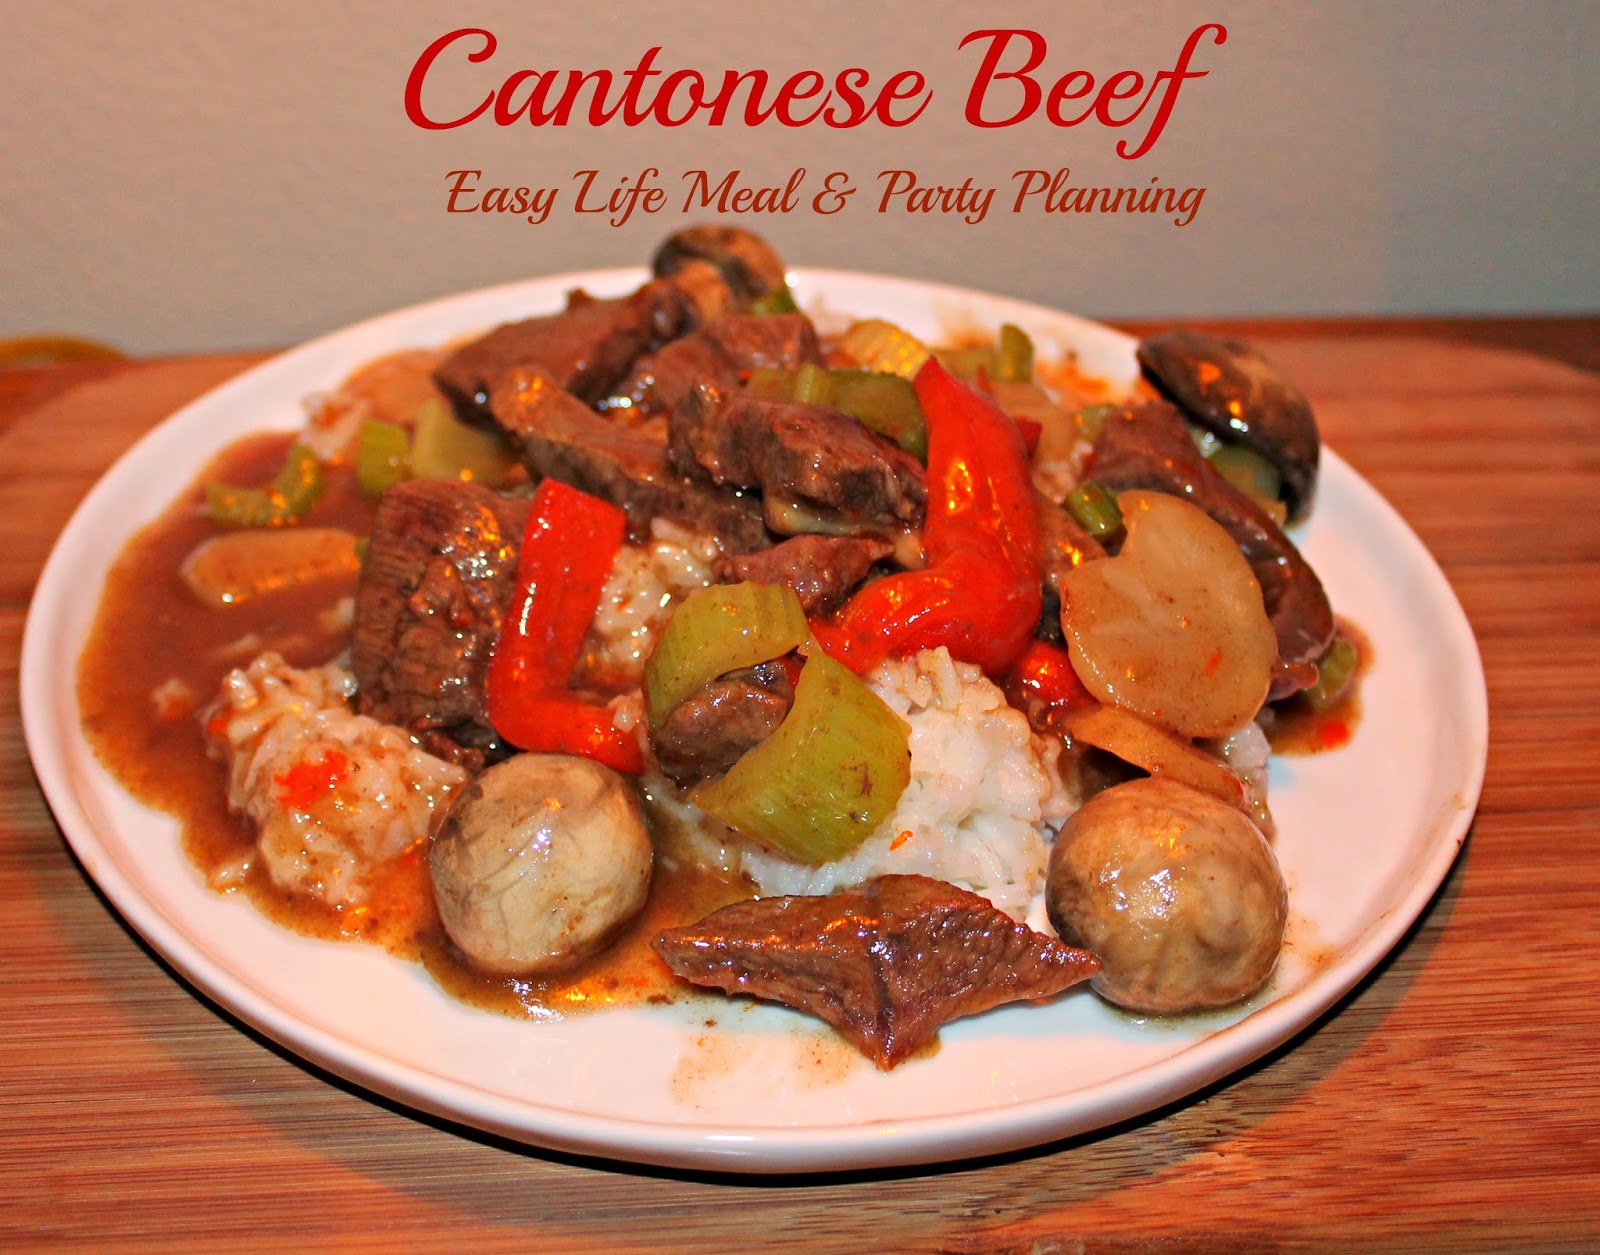 Cantonese Beef - Easy Life Meal & Party Planning - skillet meal simple to make containing spicy, sweet and sour flavors